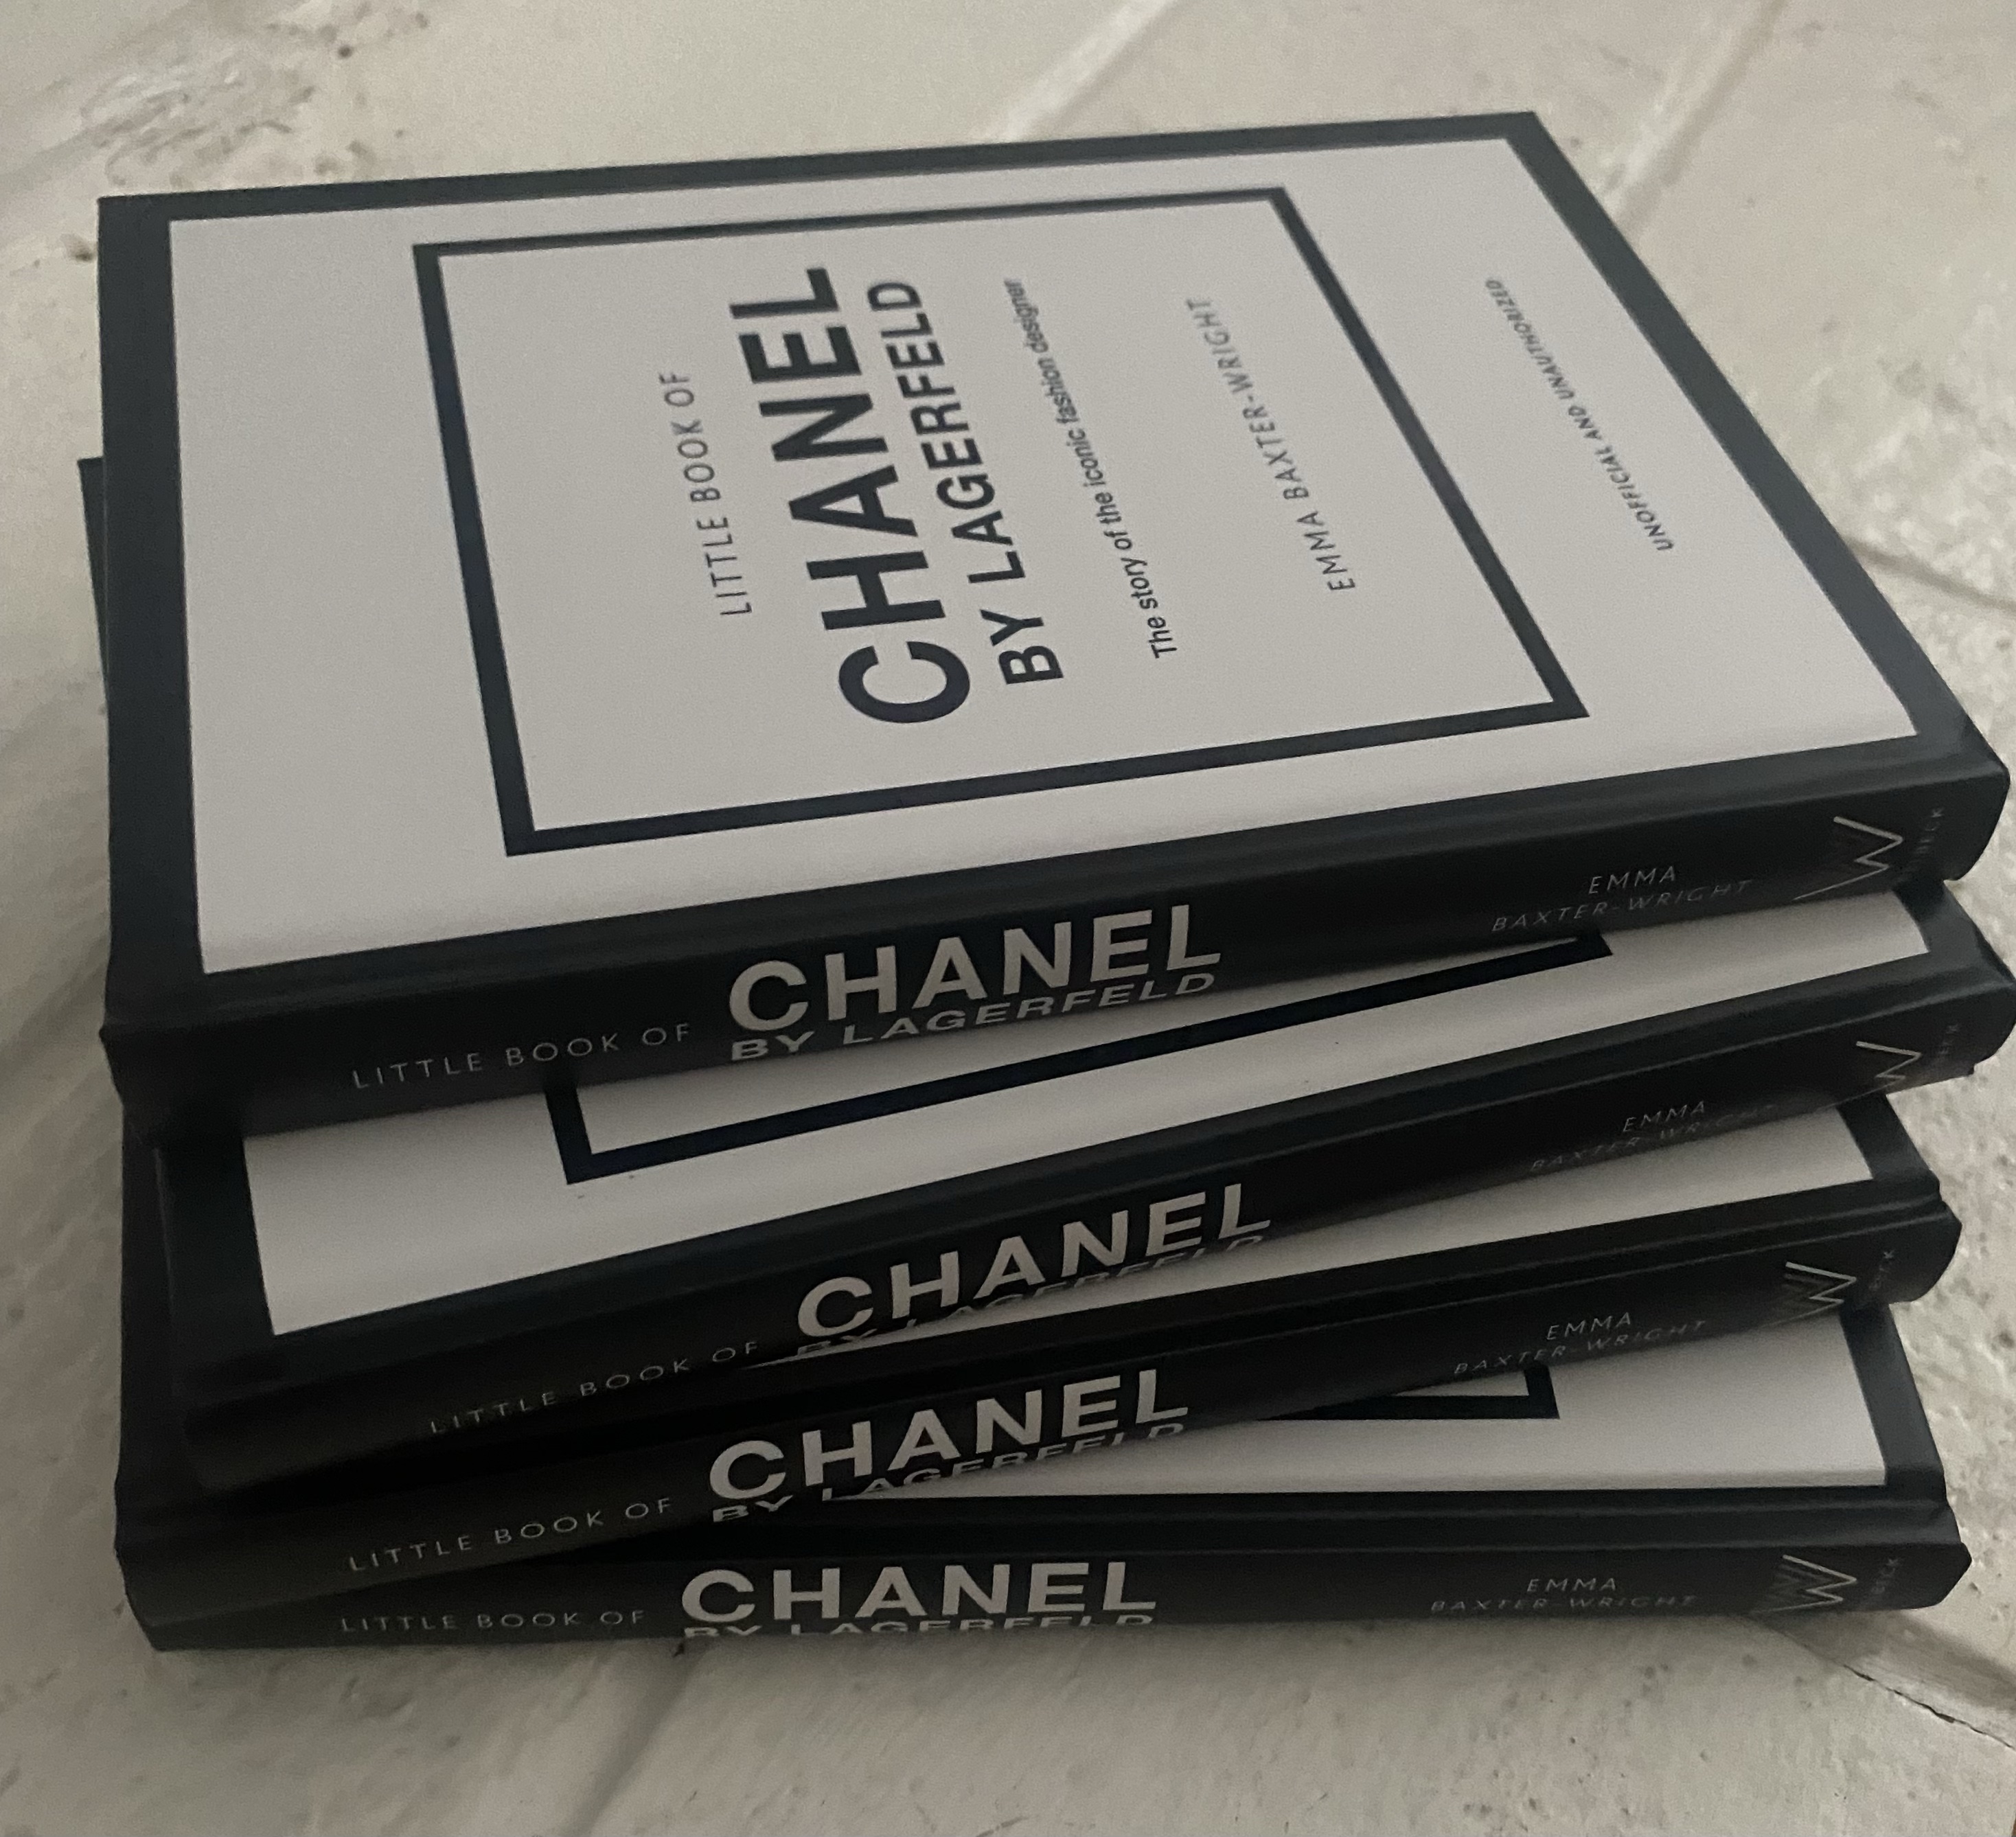 Blog - SEWING CHANEL-STYLE